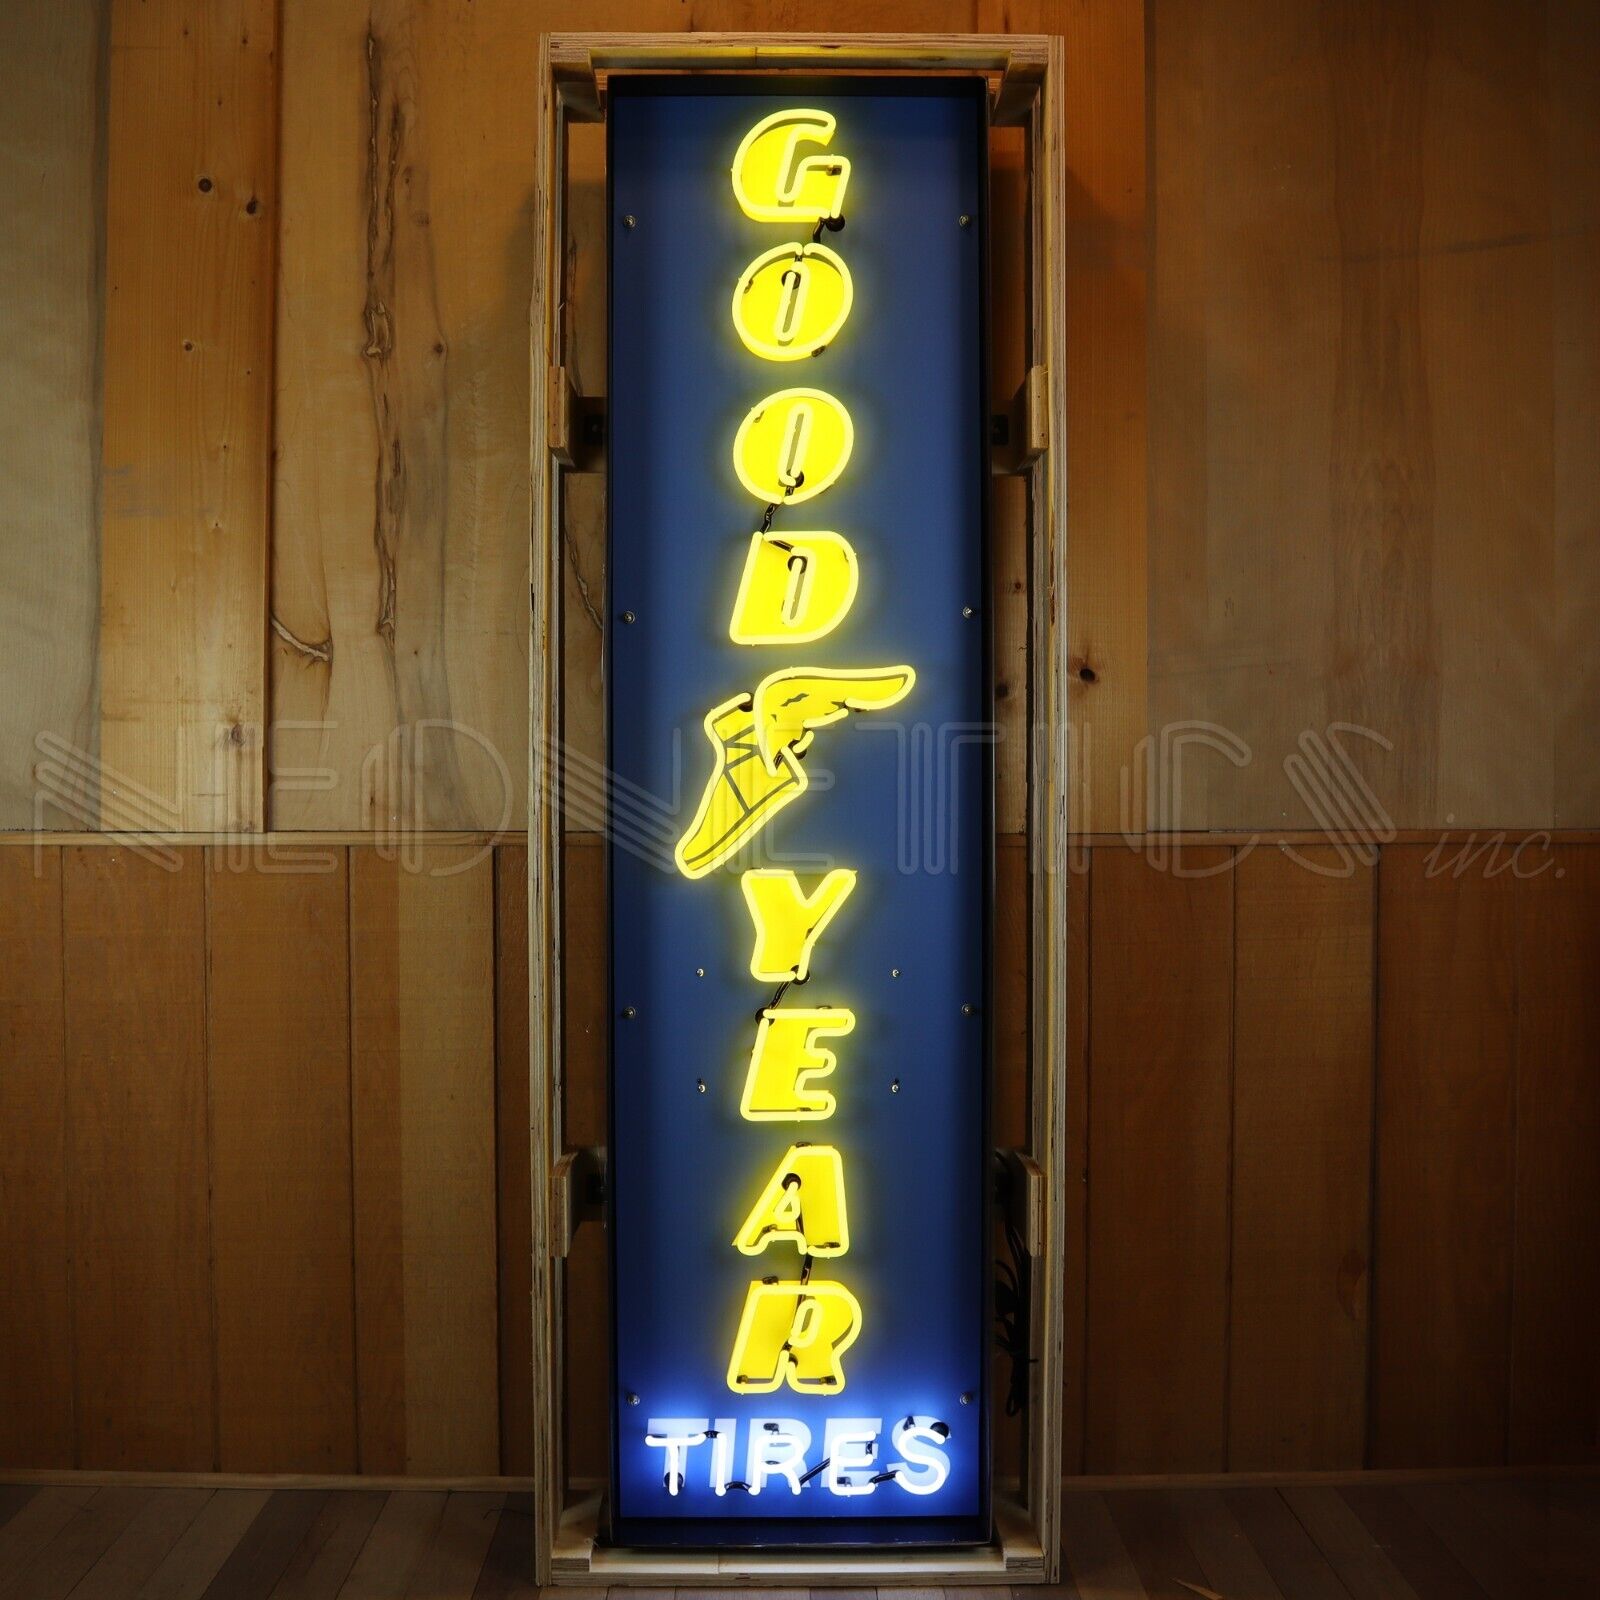 6 FOOT Vertical Good Year Tires Neon Sign in Steel Can Goodyear Tire Advertising